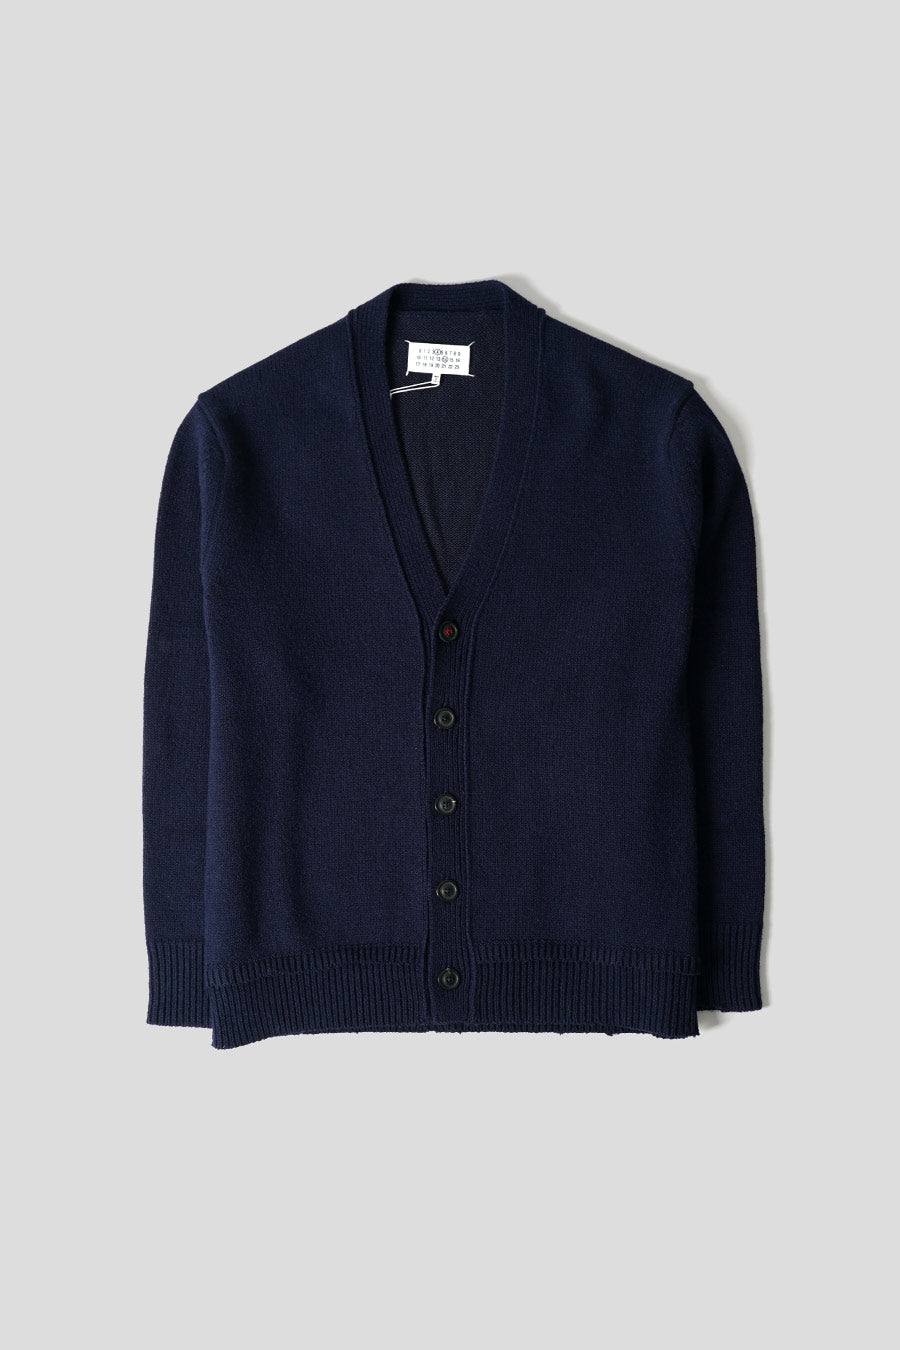 Maison Margiela - NAVY BLUE CARDIGAN WITH ELBOW PATCHES - LE LABO STORE